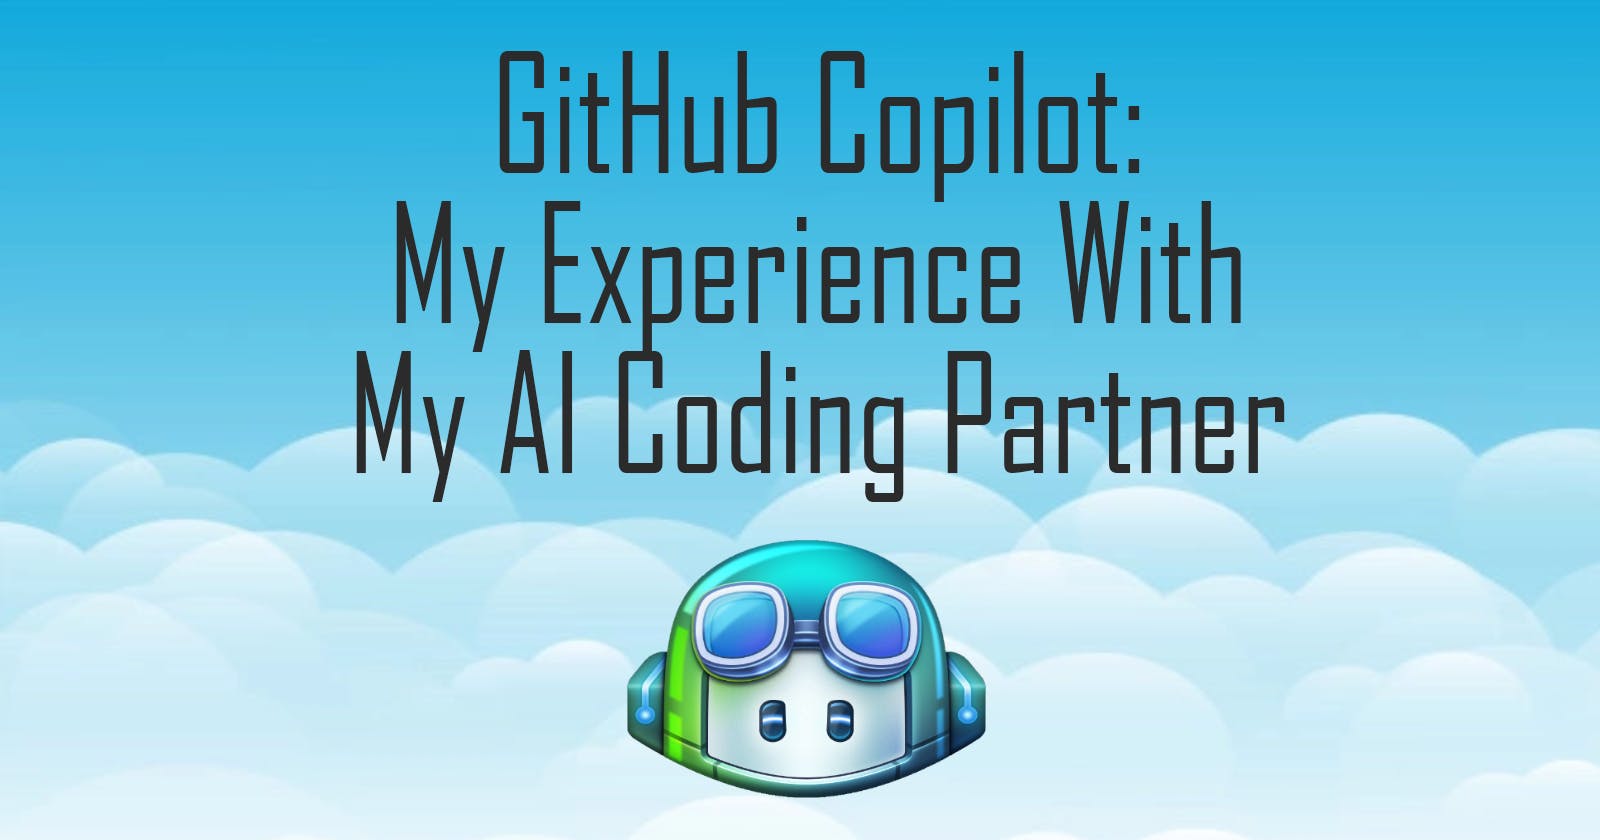 GitHub Copilot: My Experience With My AI Coding Partner